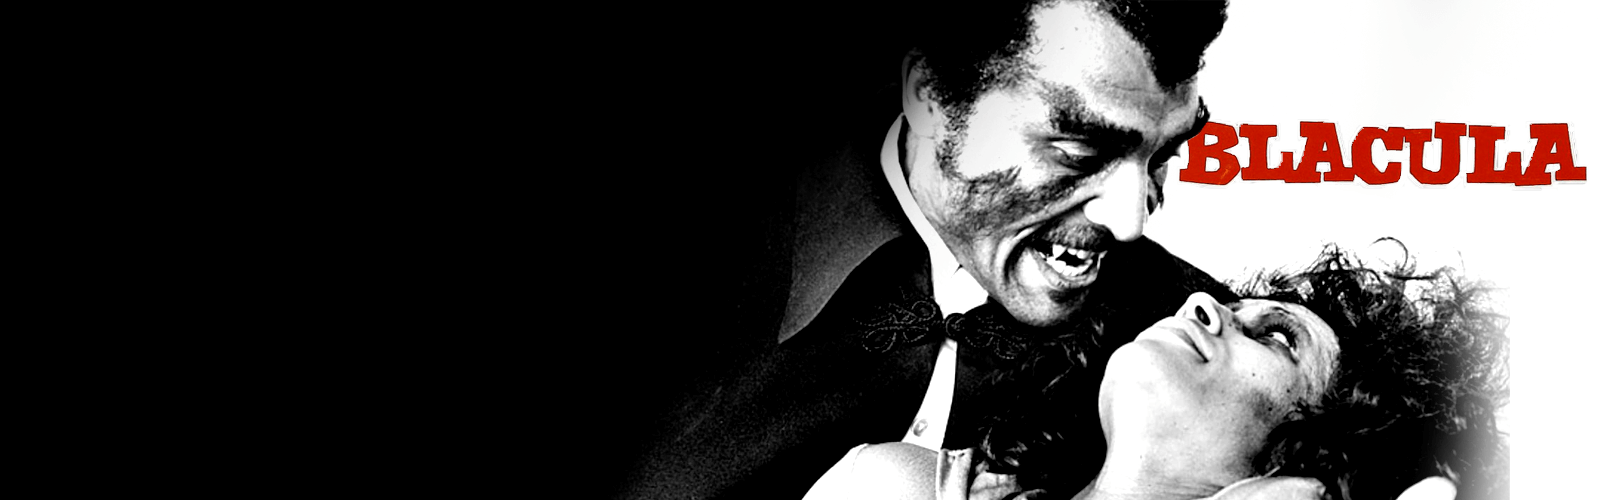 Blacula image sourced from The Collinsport Historical Society.No copyright infringement intended